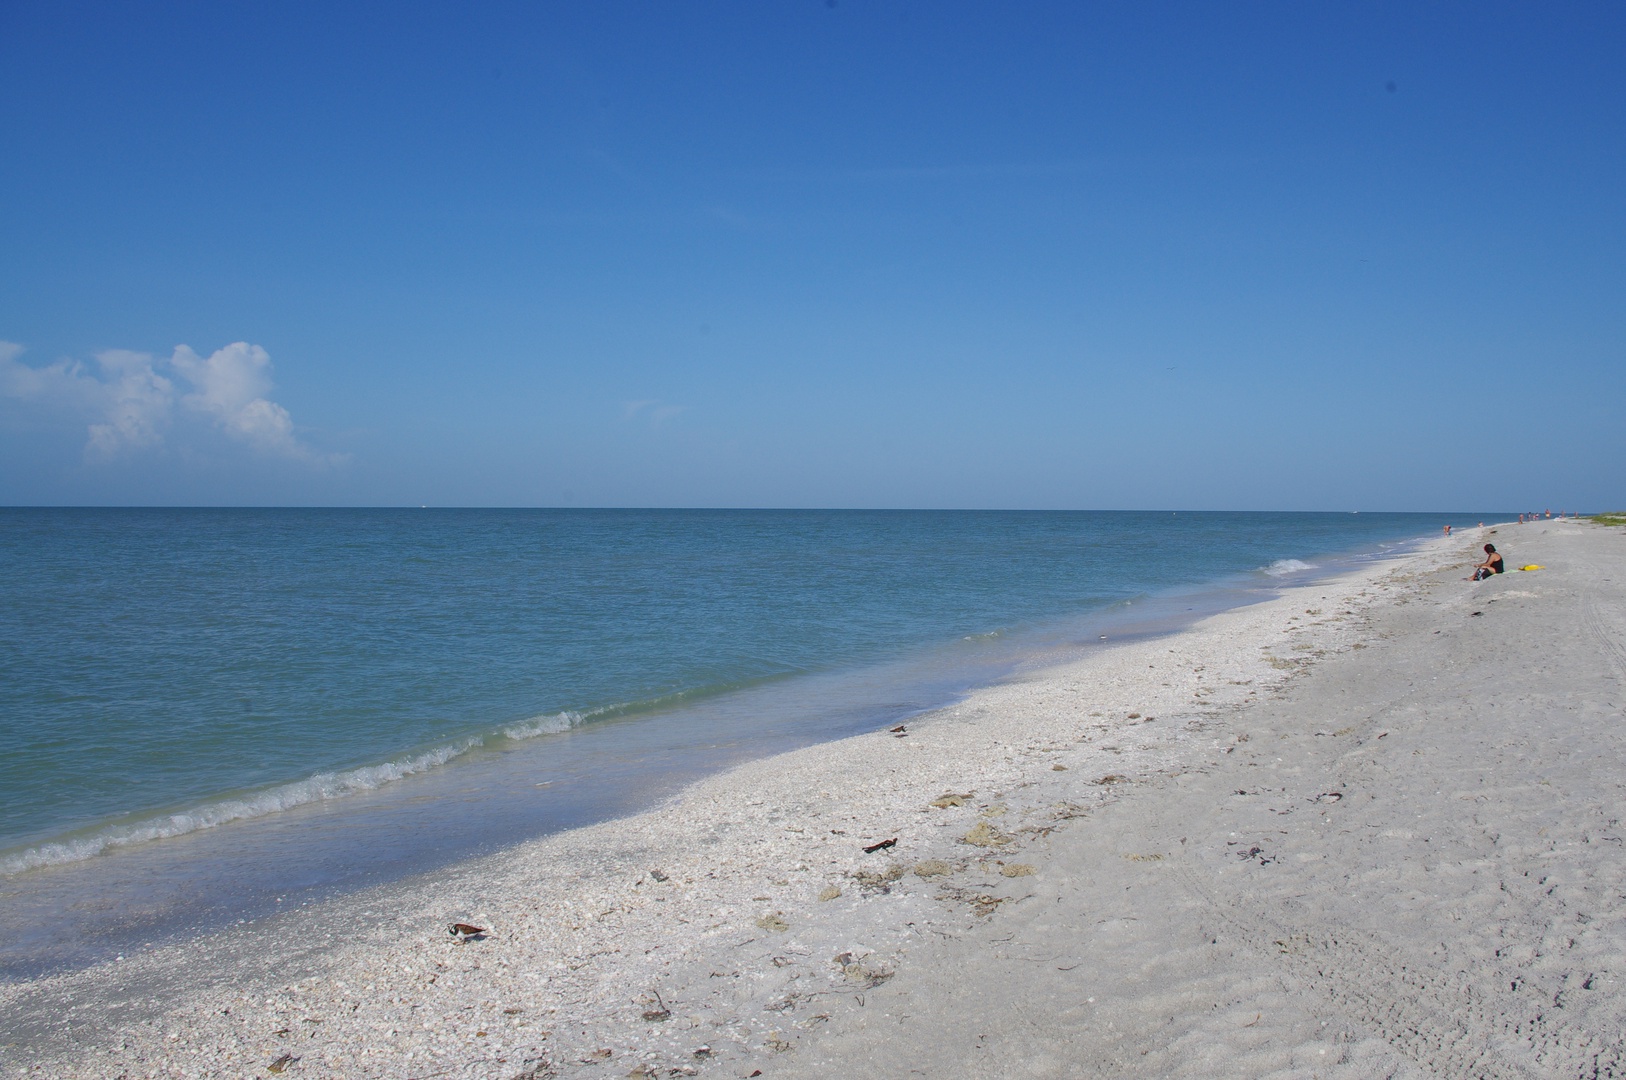 There is a deeded beach access for Seagull Estates.